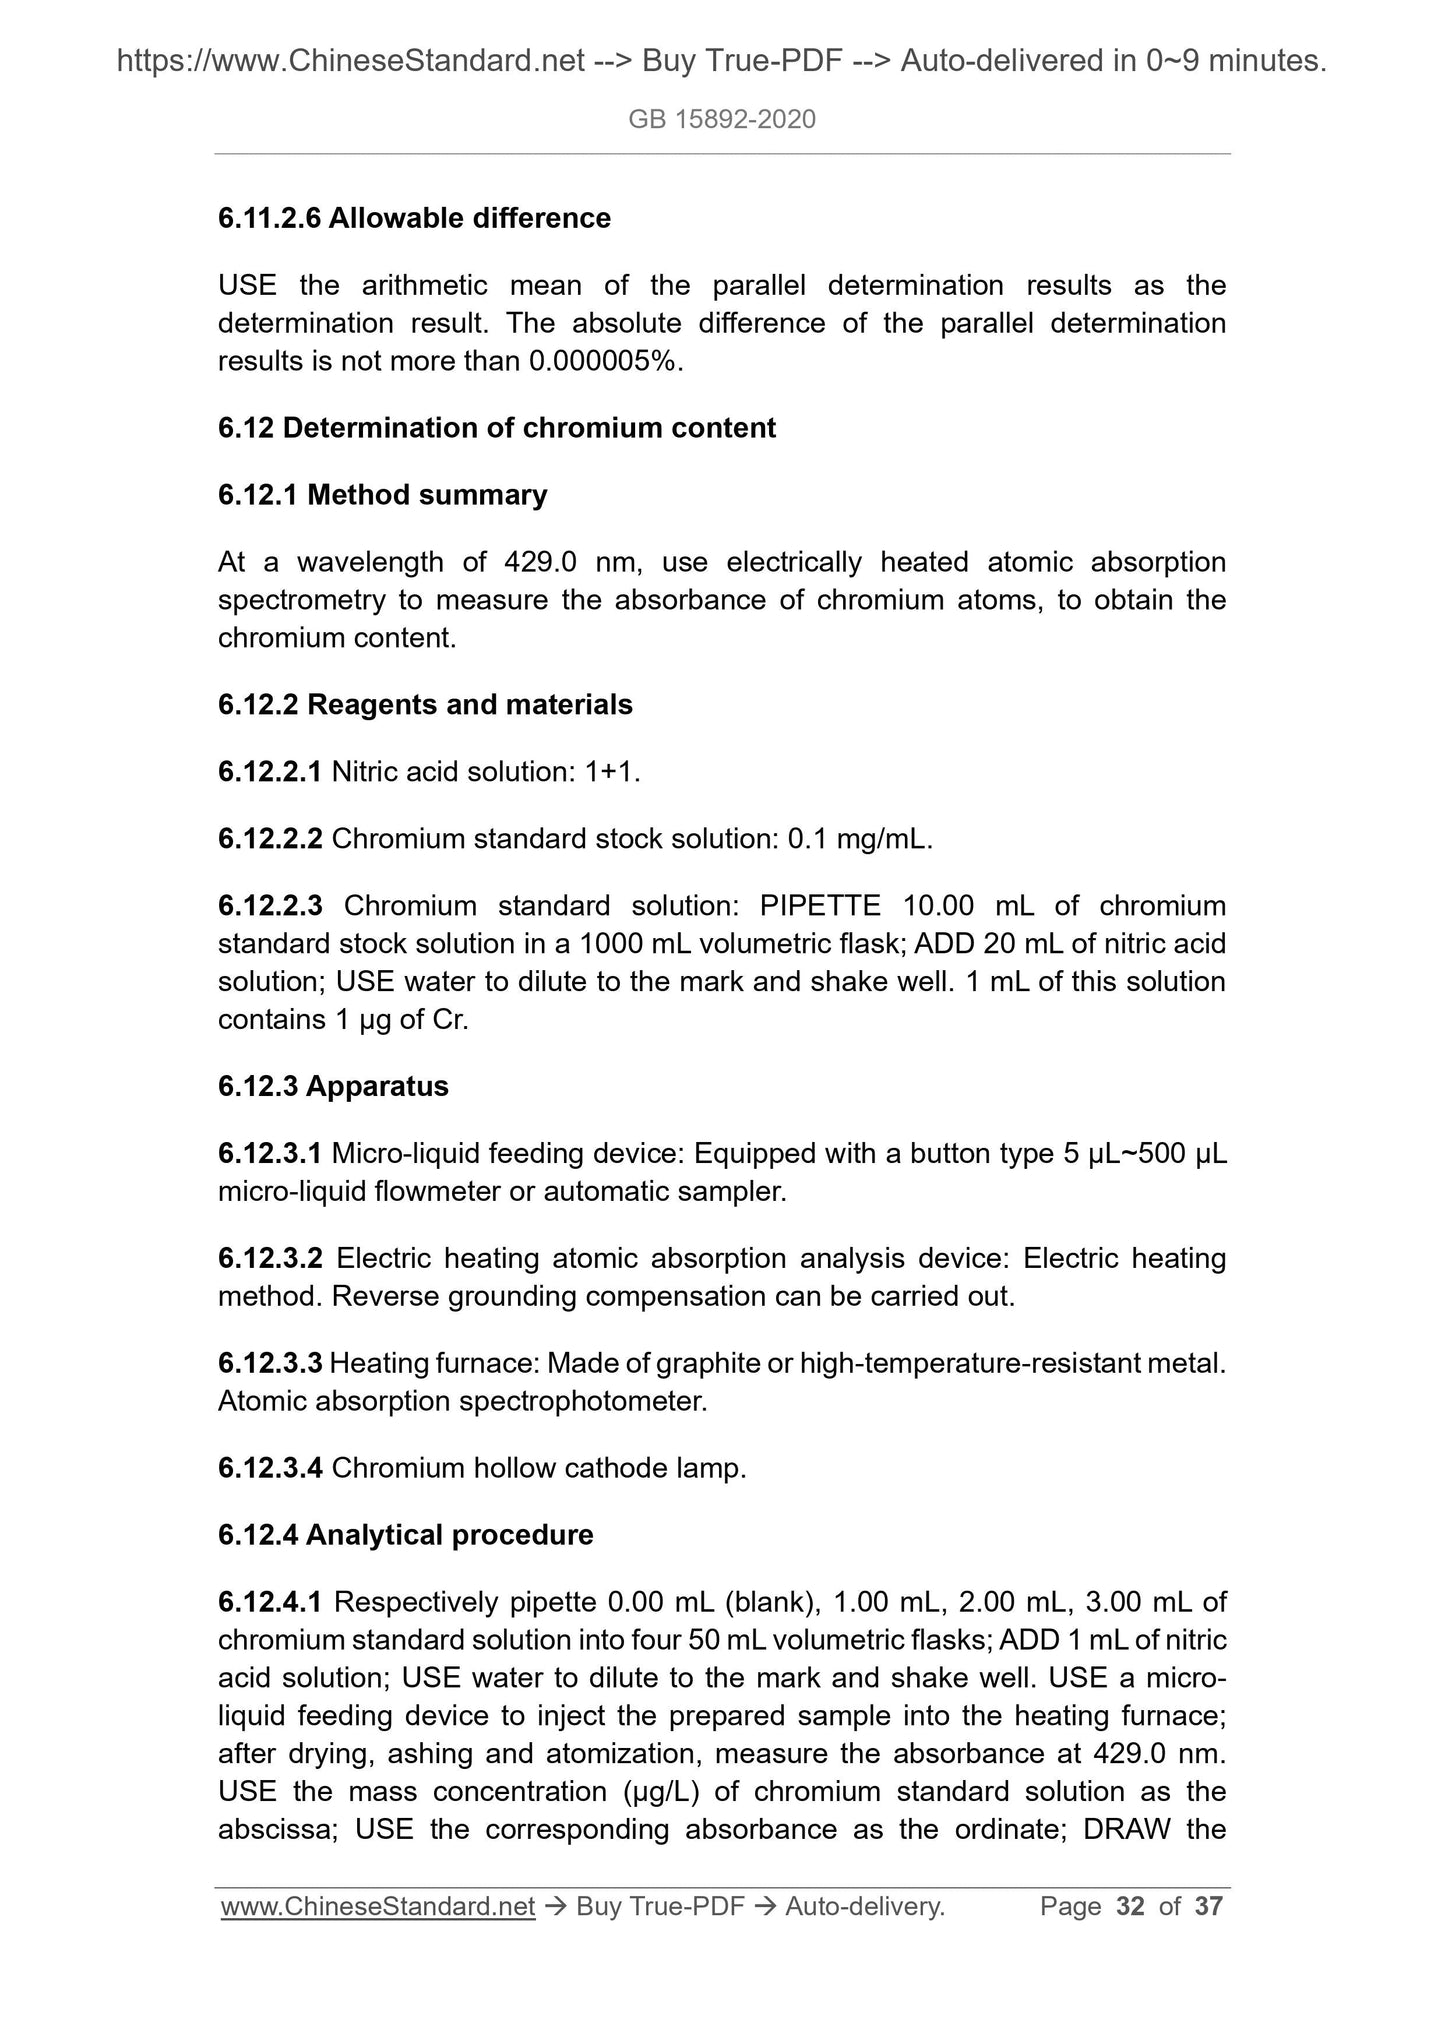 GB 15892-2020 Page 12